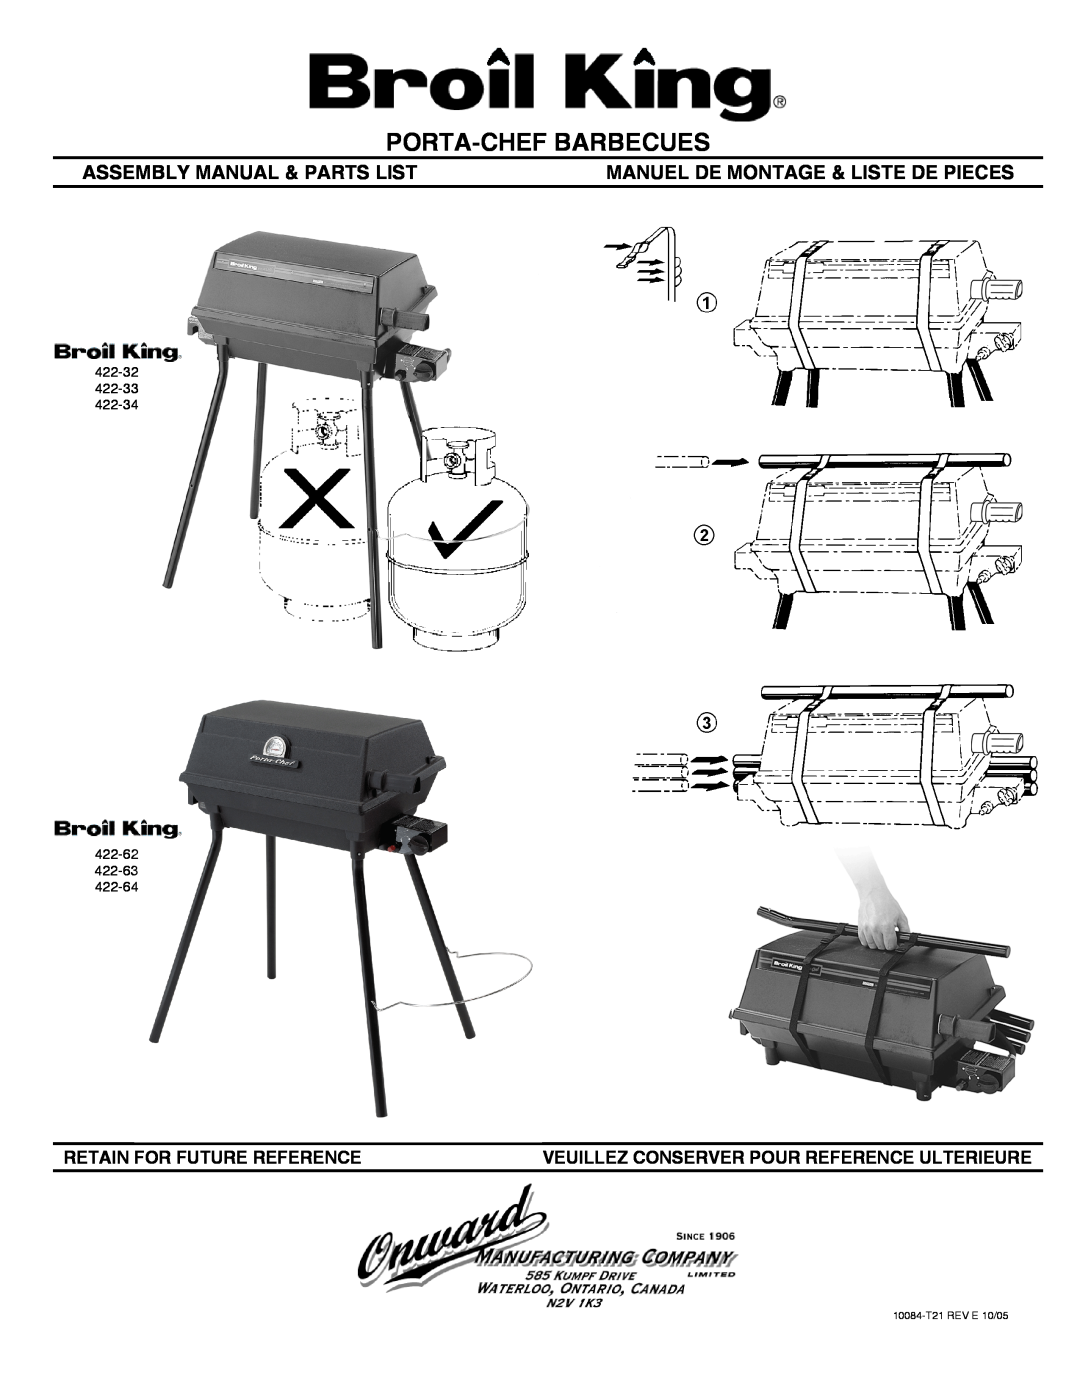 Broil King 422-34 manual Retain For Future Reference, Veuillez Conserver Pour Reference Ulterieure, Porta-Chef Barbecues 